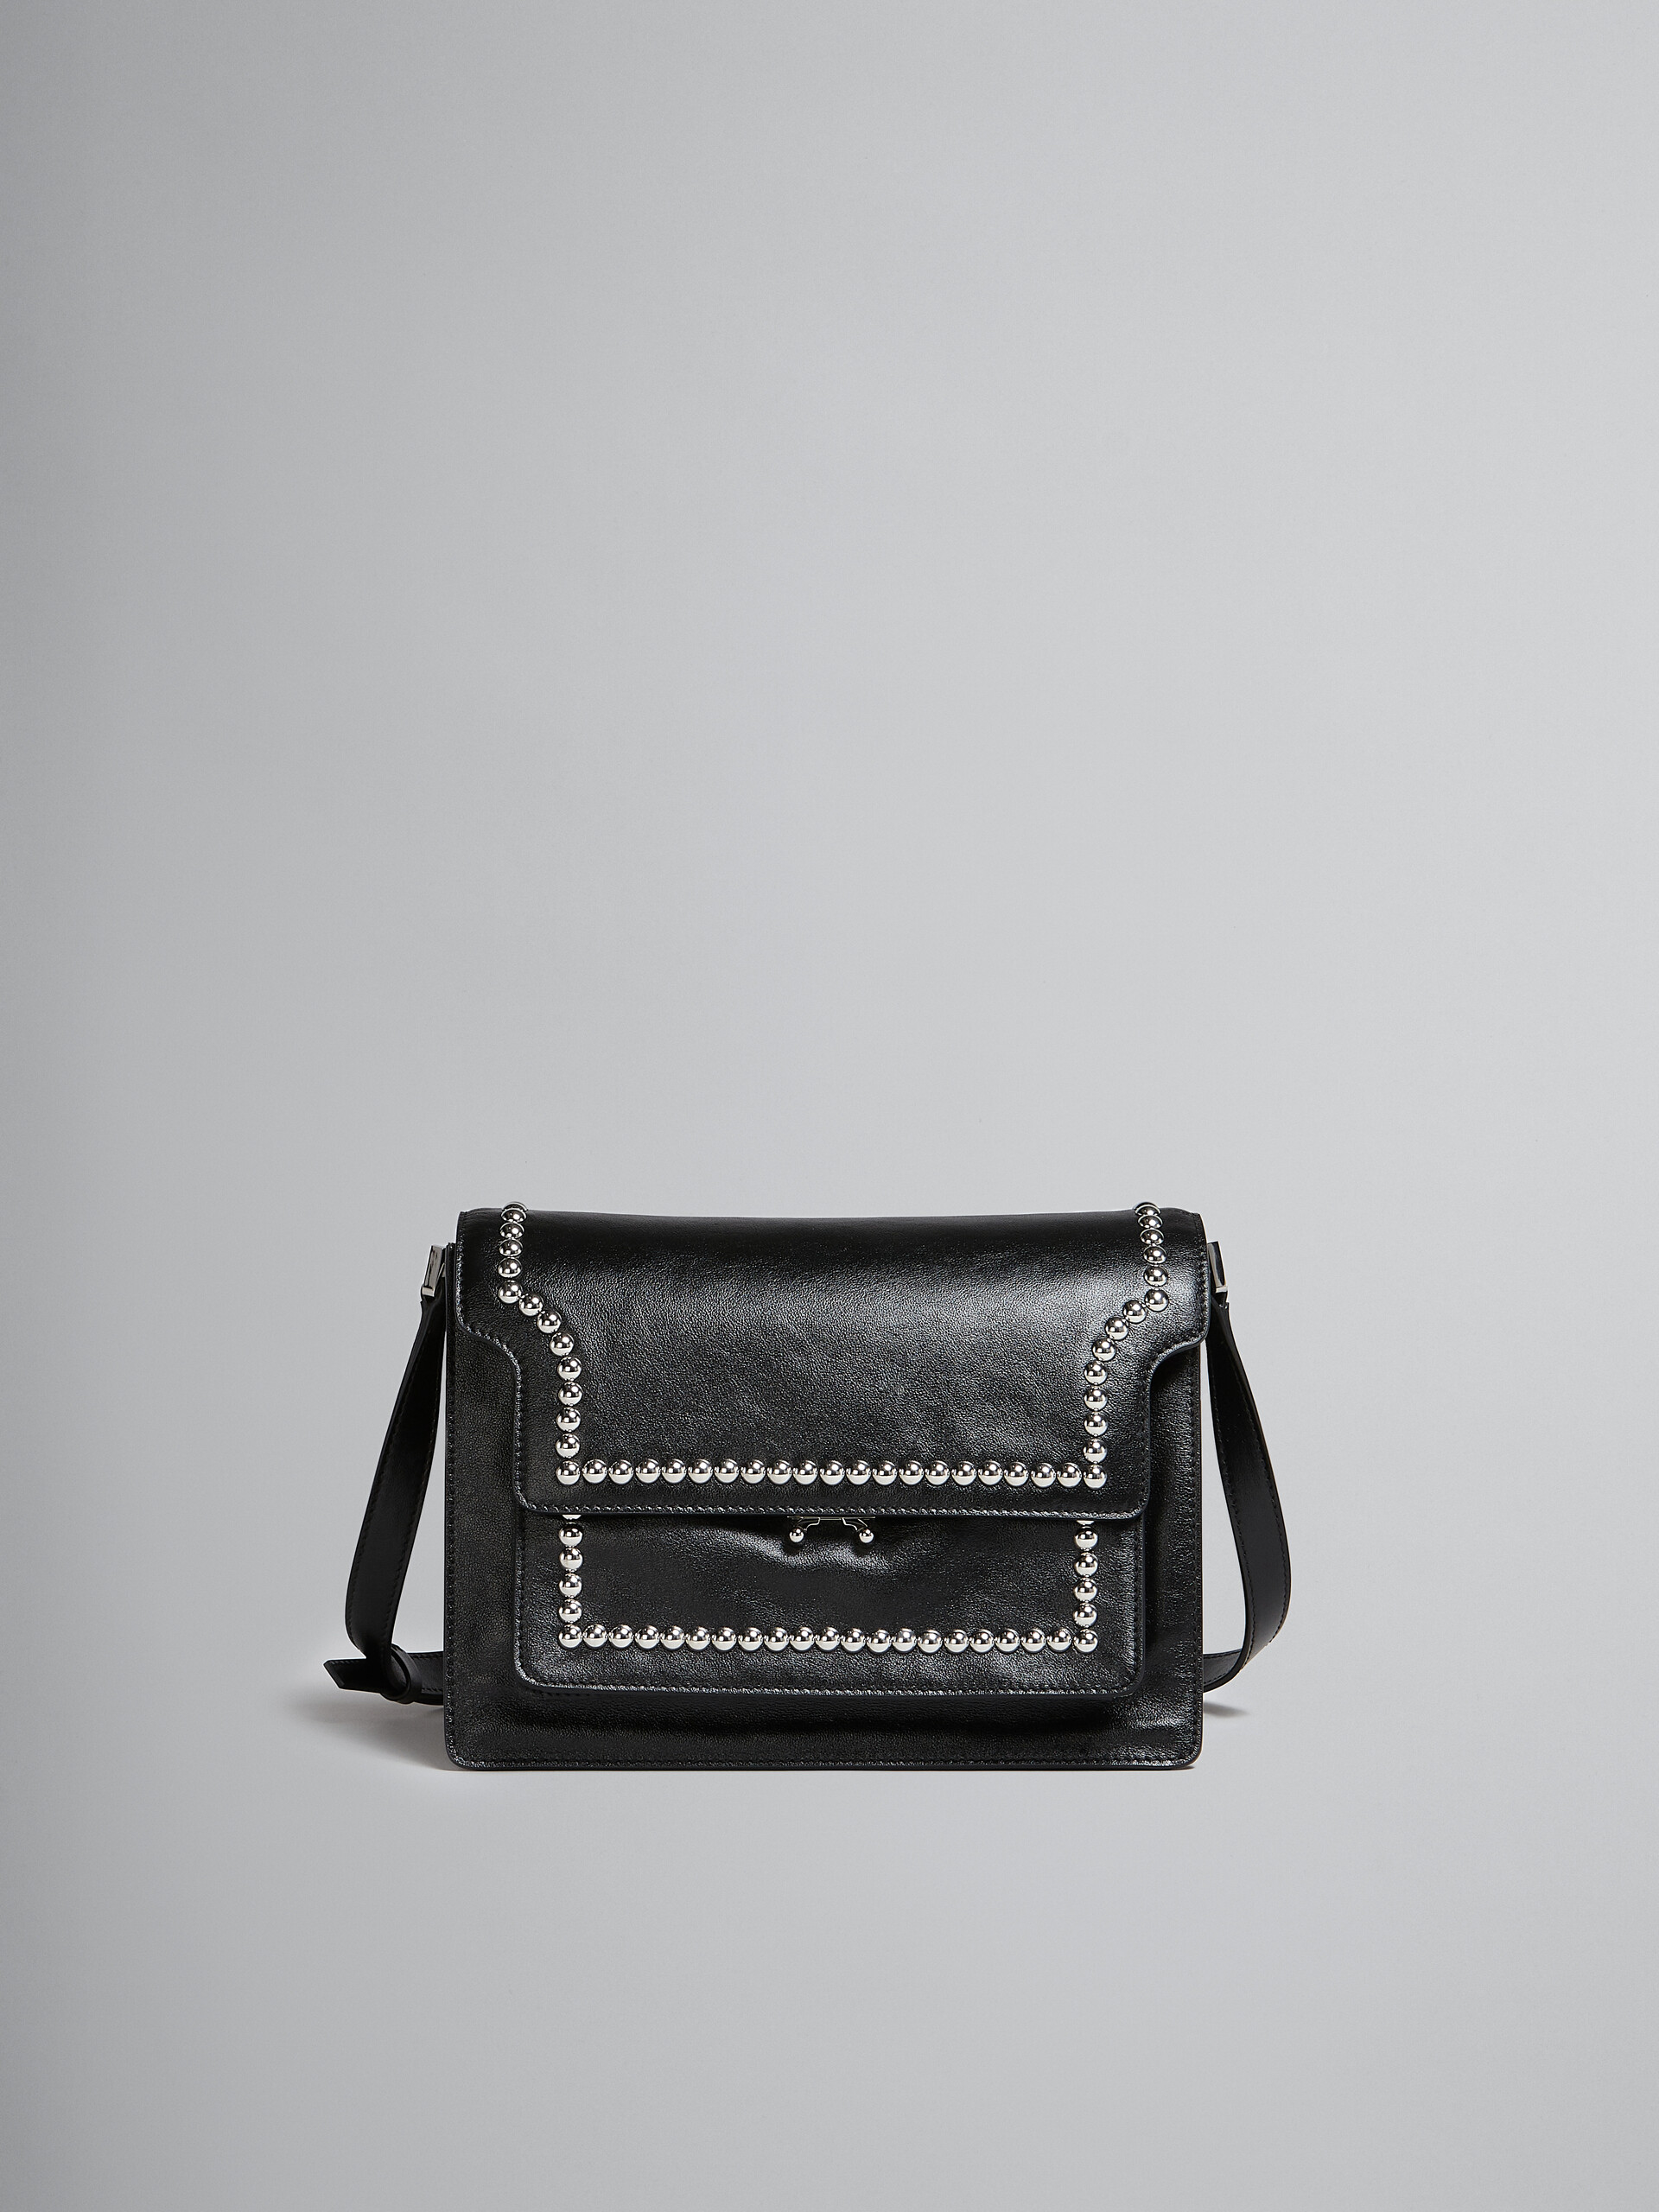 Trunk Soft Large Bag in black leather with studs - Shoulder Bags - Image 1